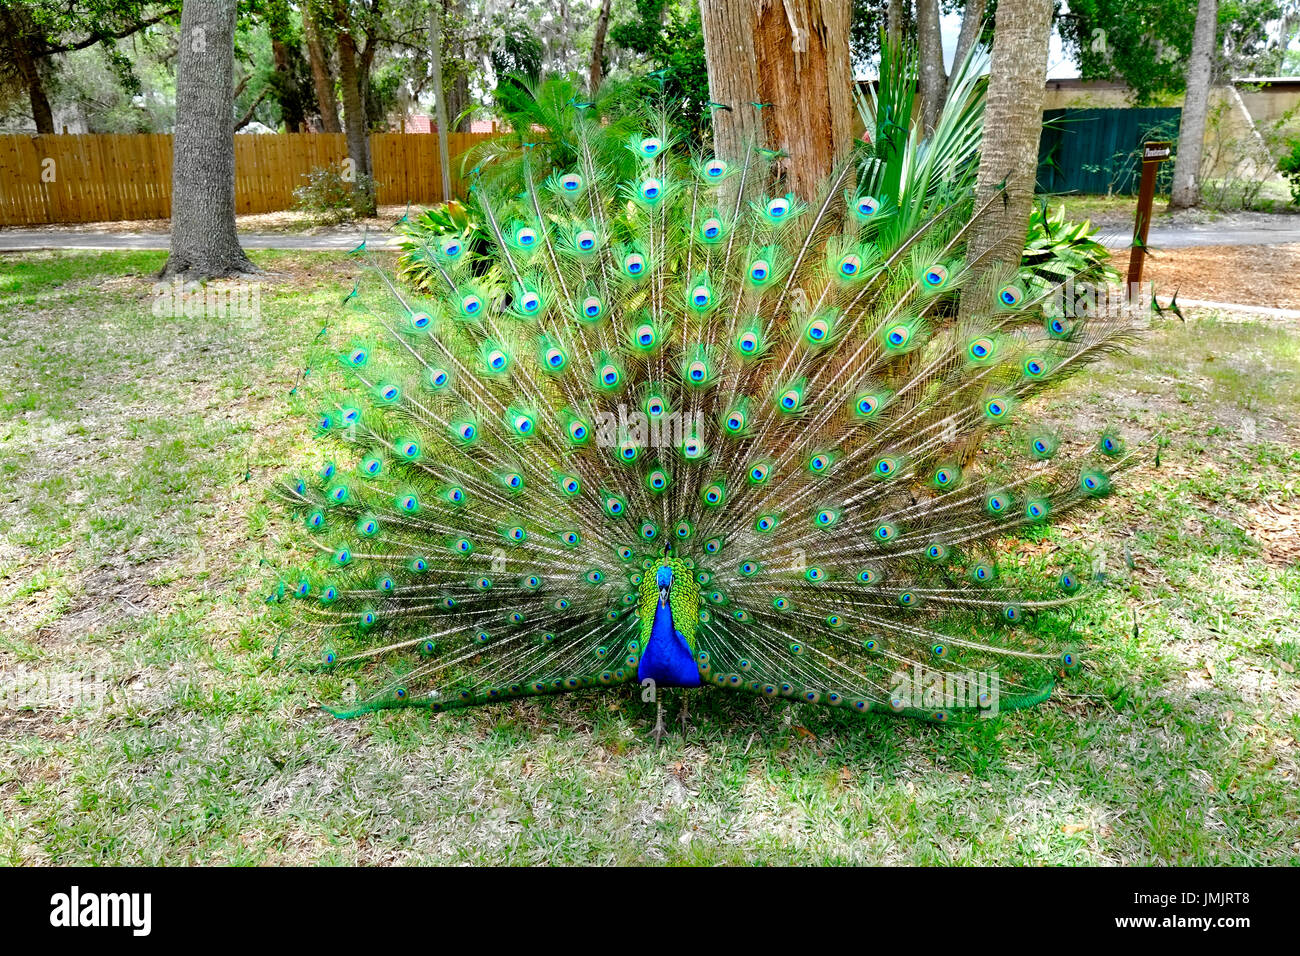 Male peacock displaying showing colorful tail feathers Stock Photo